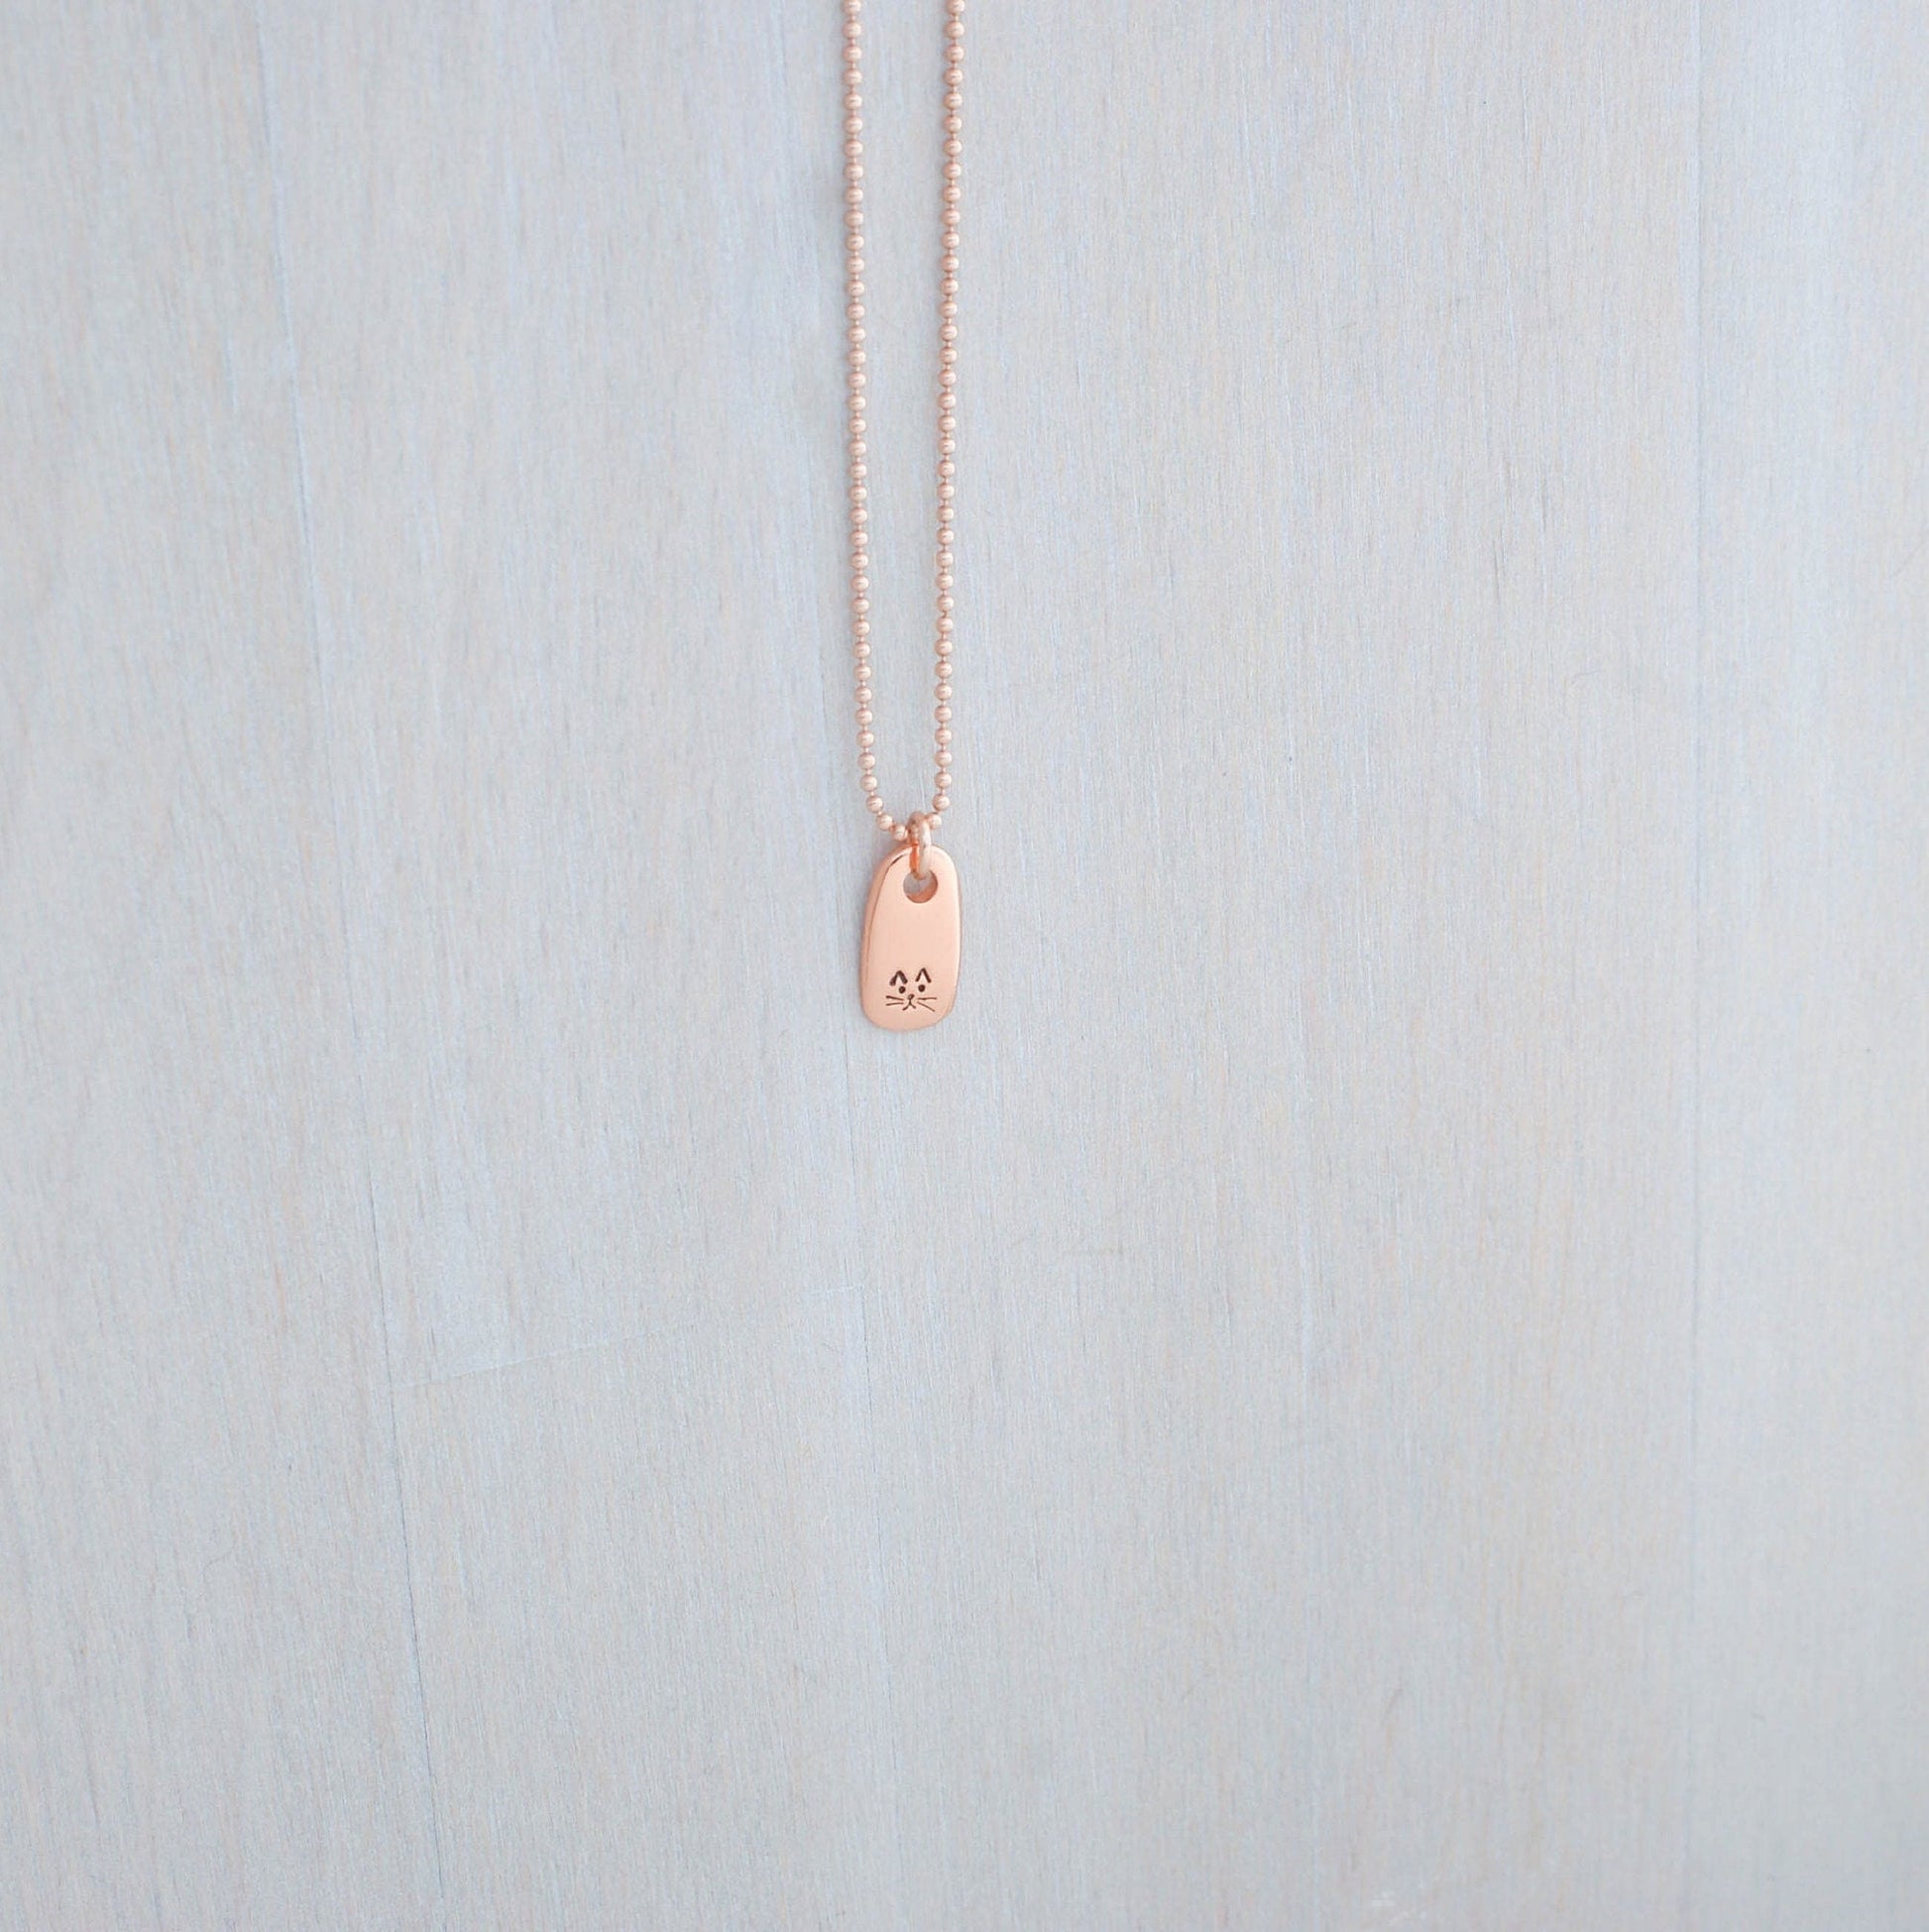 Petite Rose Gold Necklace handstamped with a kitty face